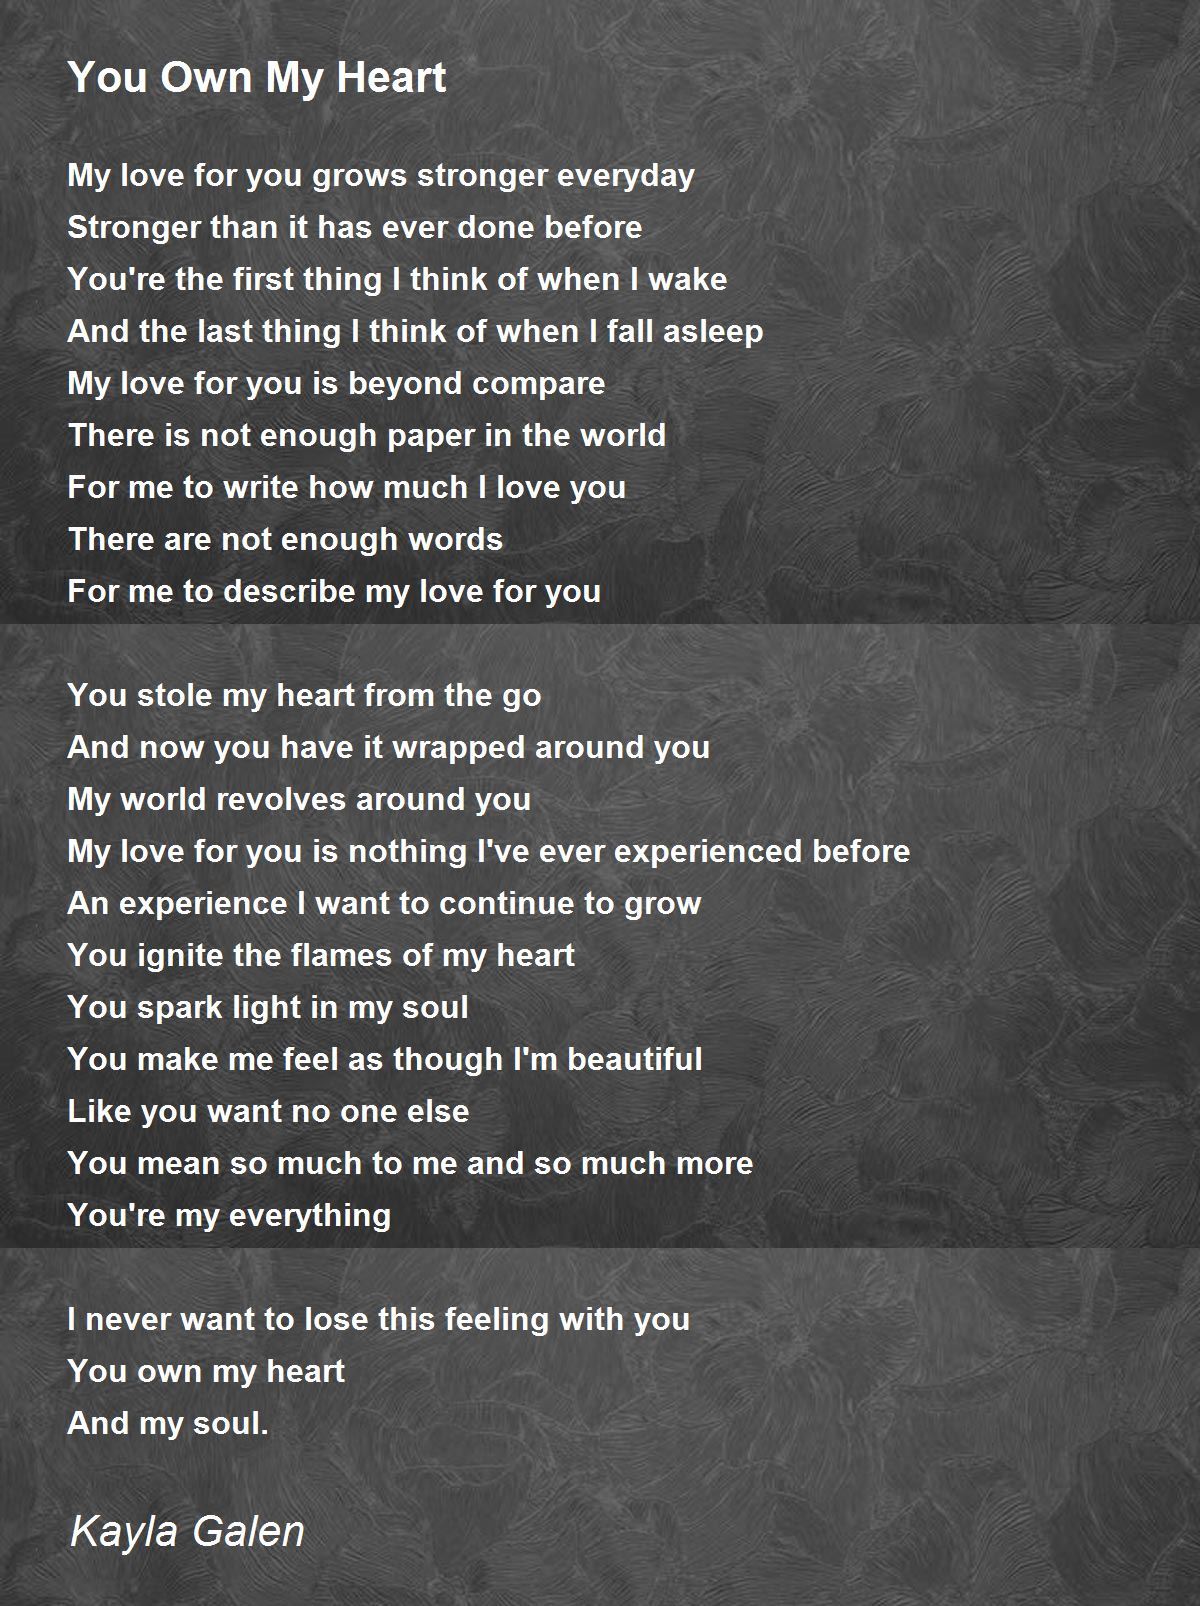 With you in my heart poem